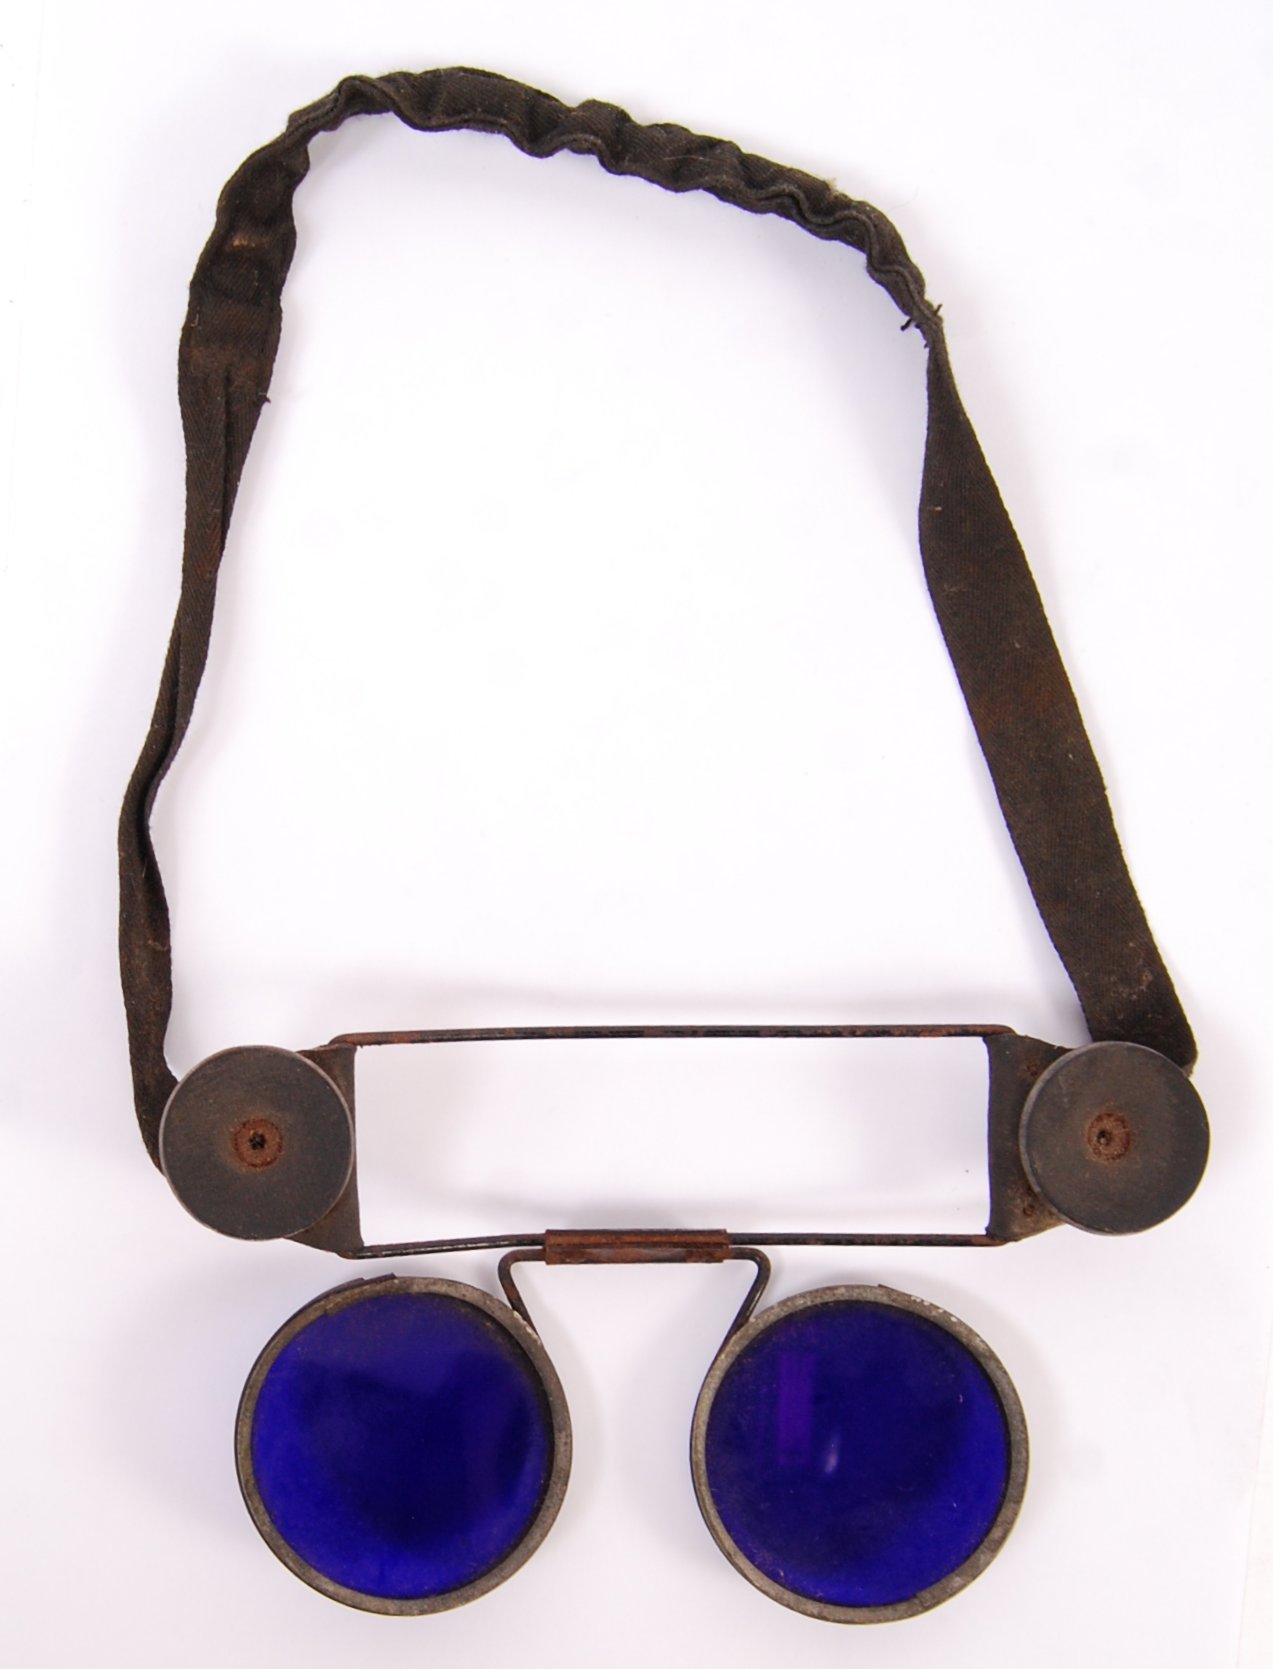 RARE WWII SECOND WORLD WAR GERMAN U-BOAT BLUE GOGGLES - Image 2 of 5